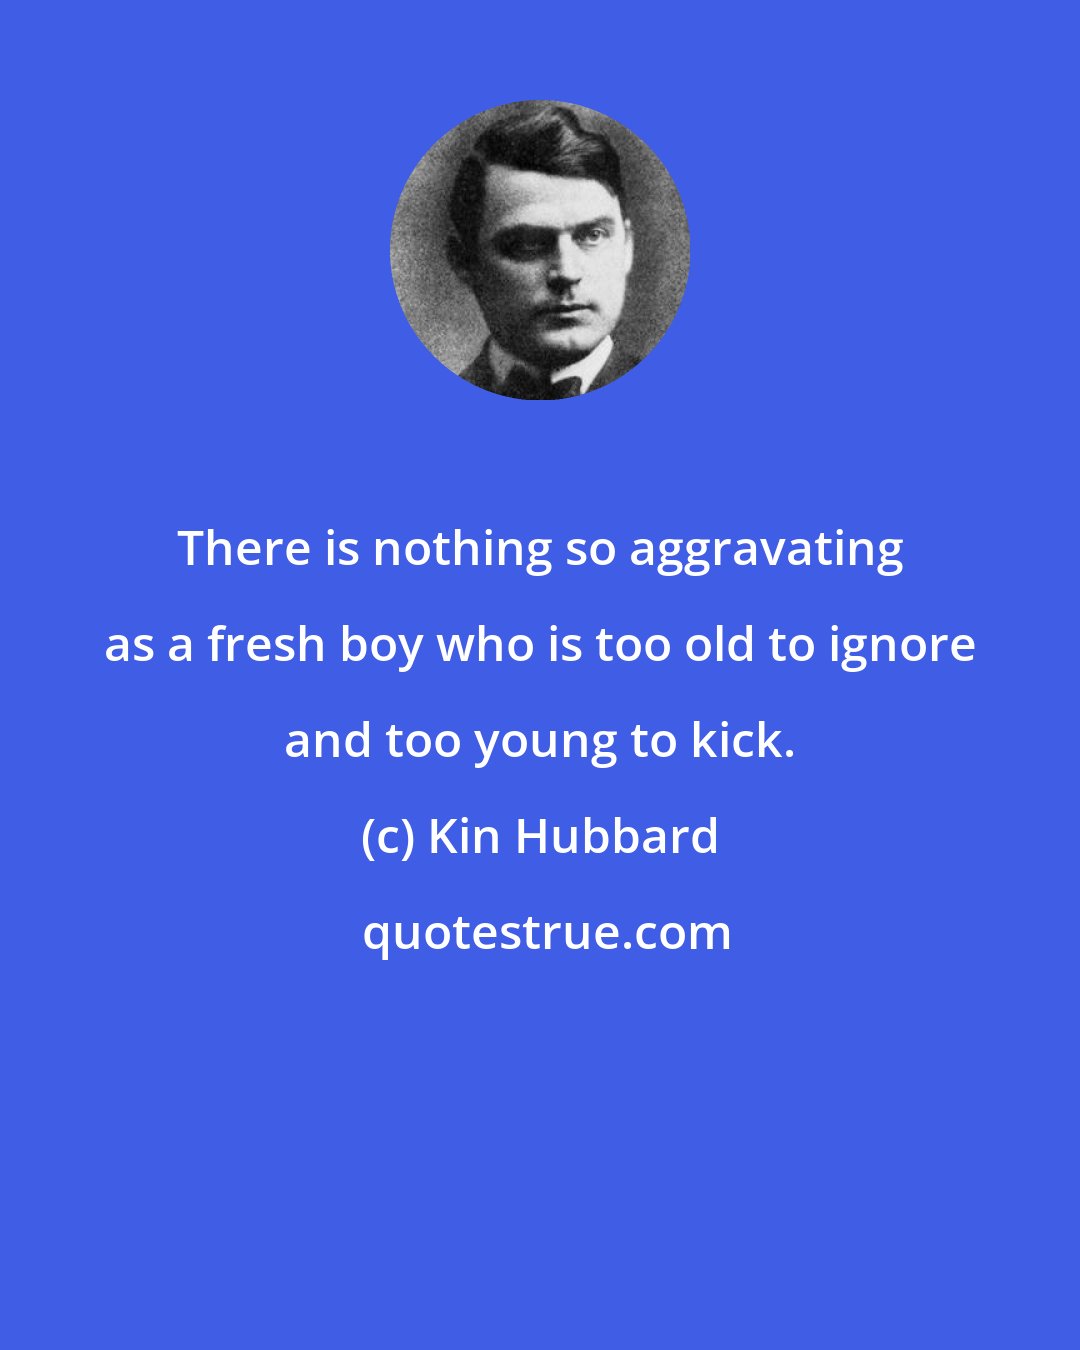 Kin Hubbard: There is nothing so aggravating as a fresh boy who is too old to ignore and too young to kick.